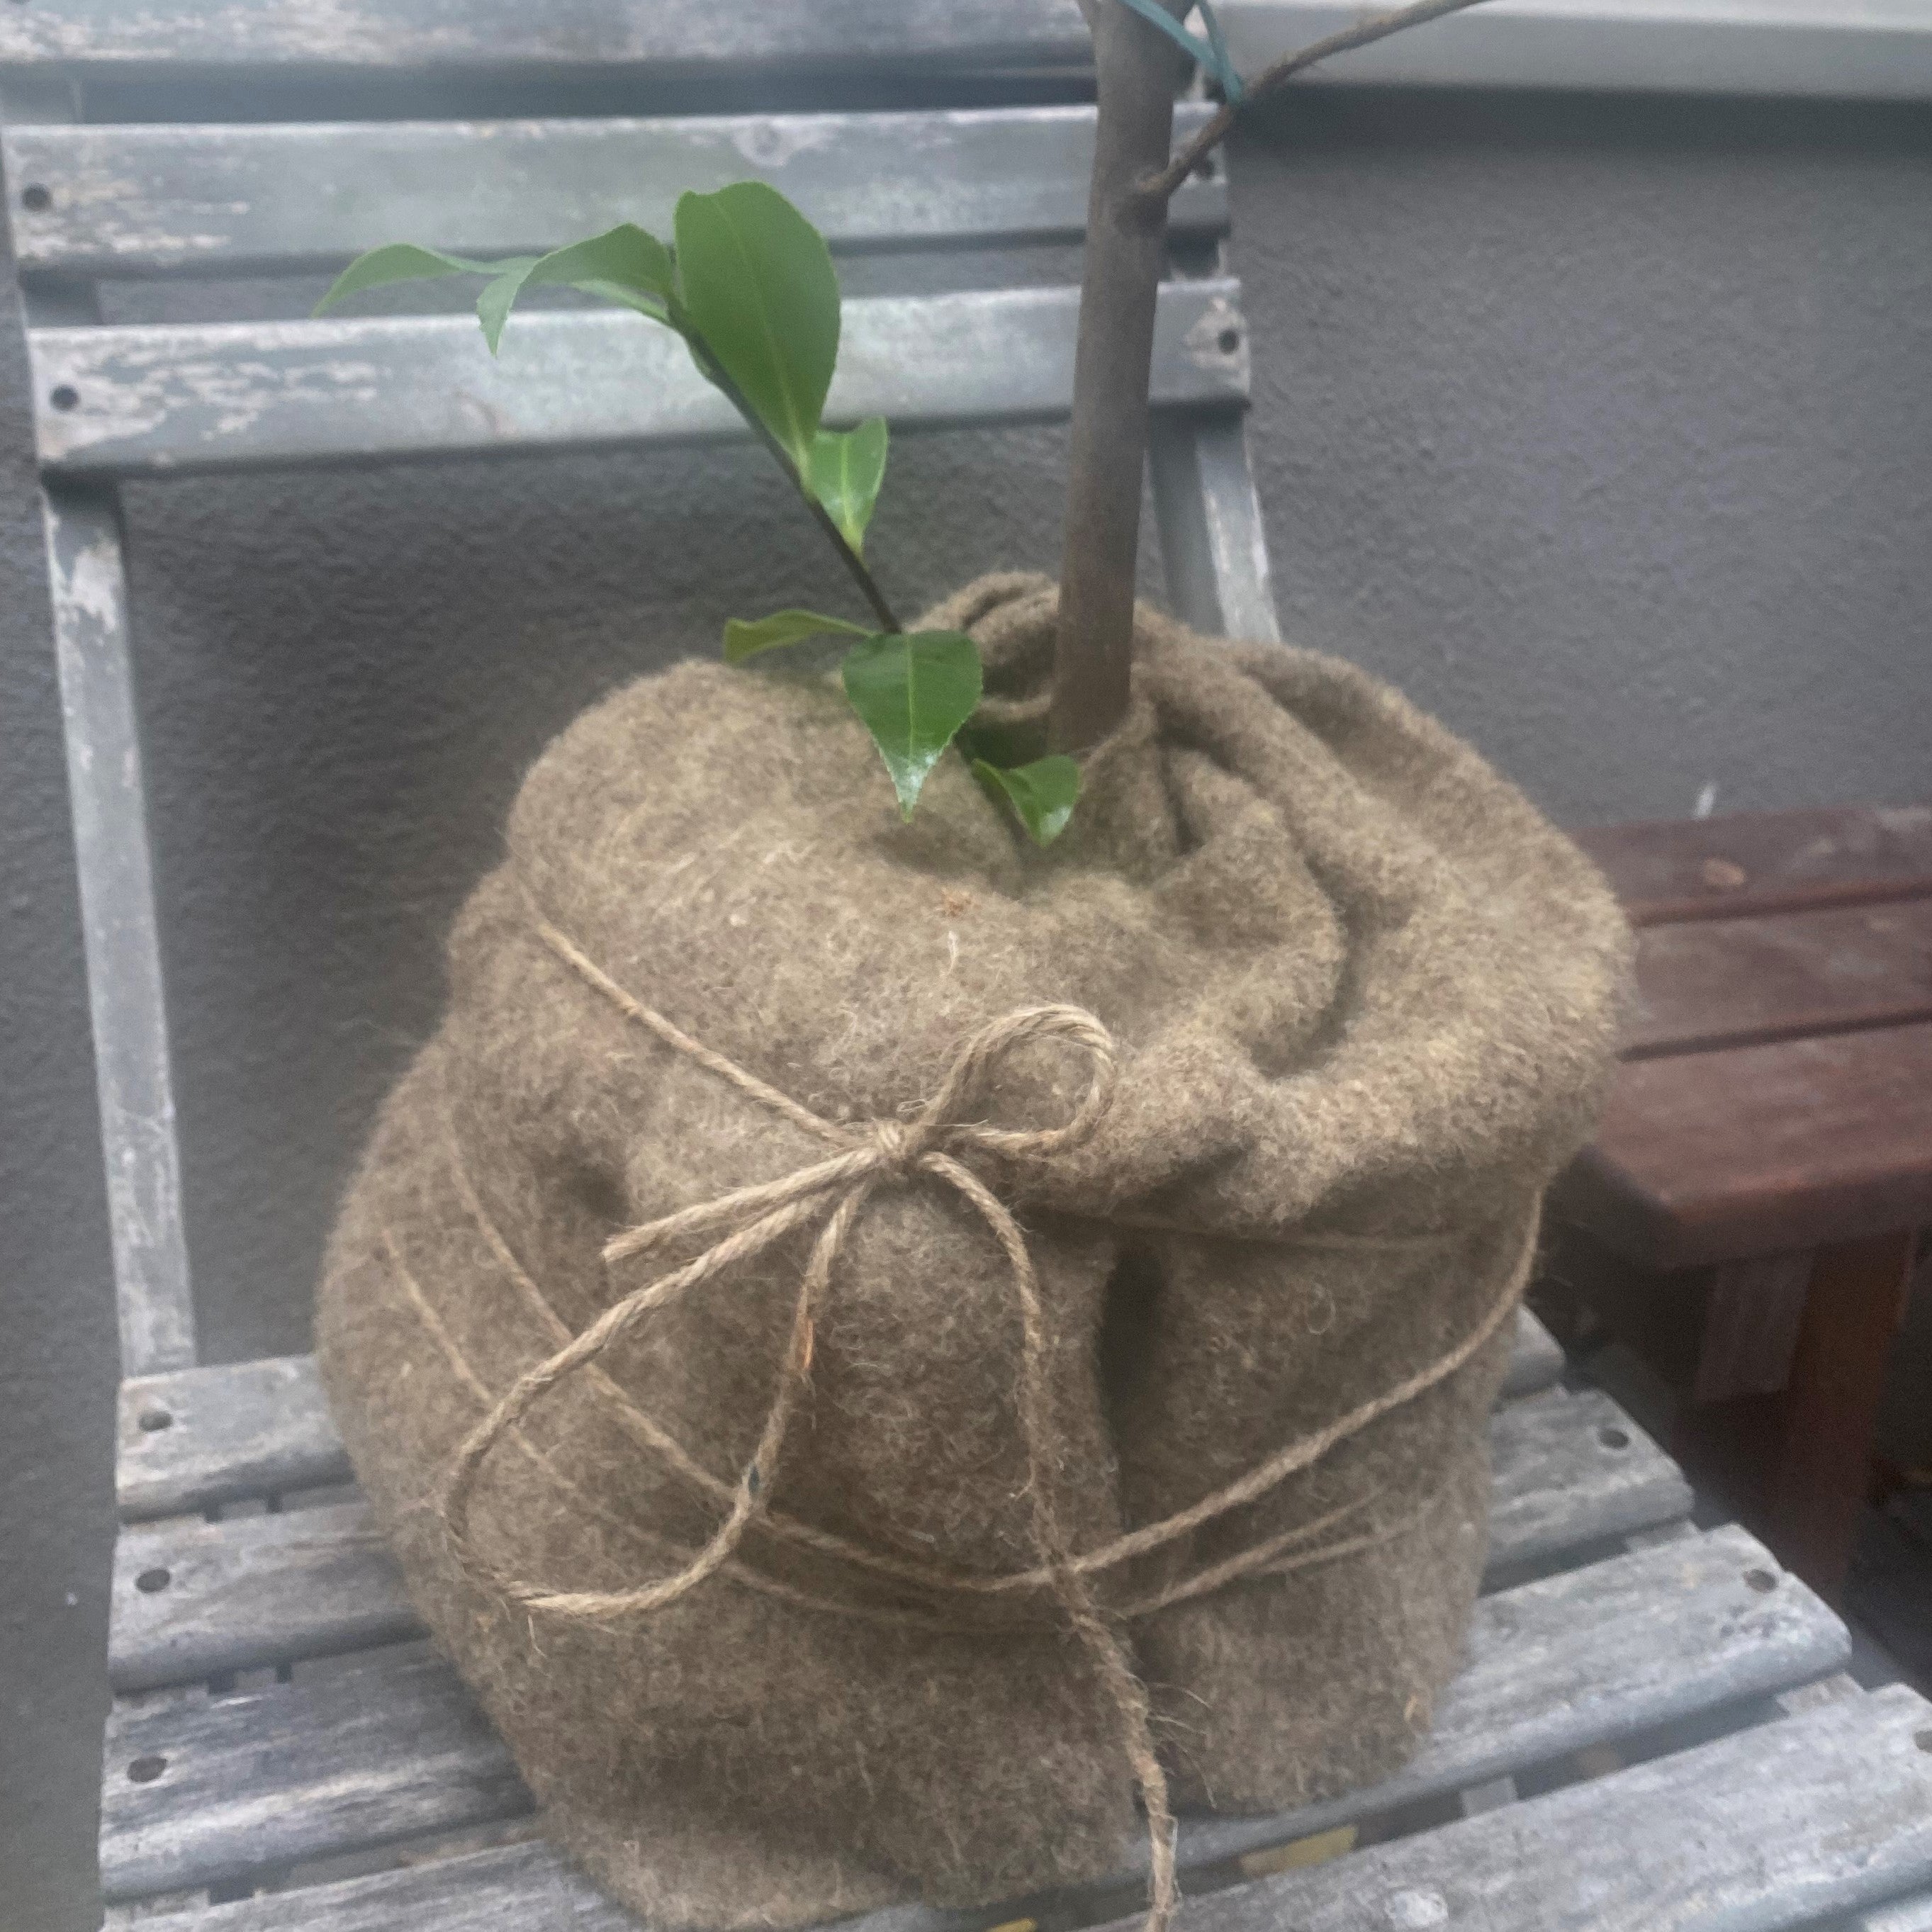 Winter protection set: sheep's wool felt mat with jute cord